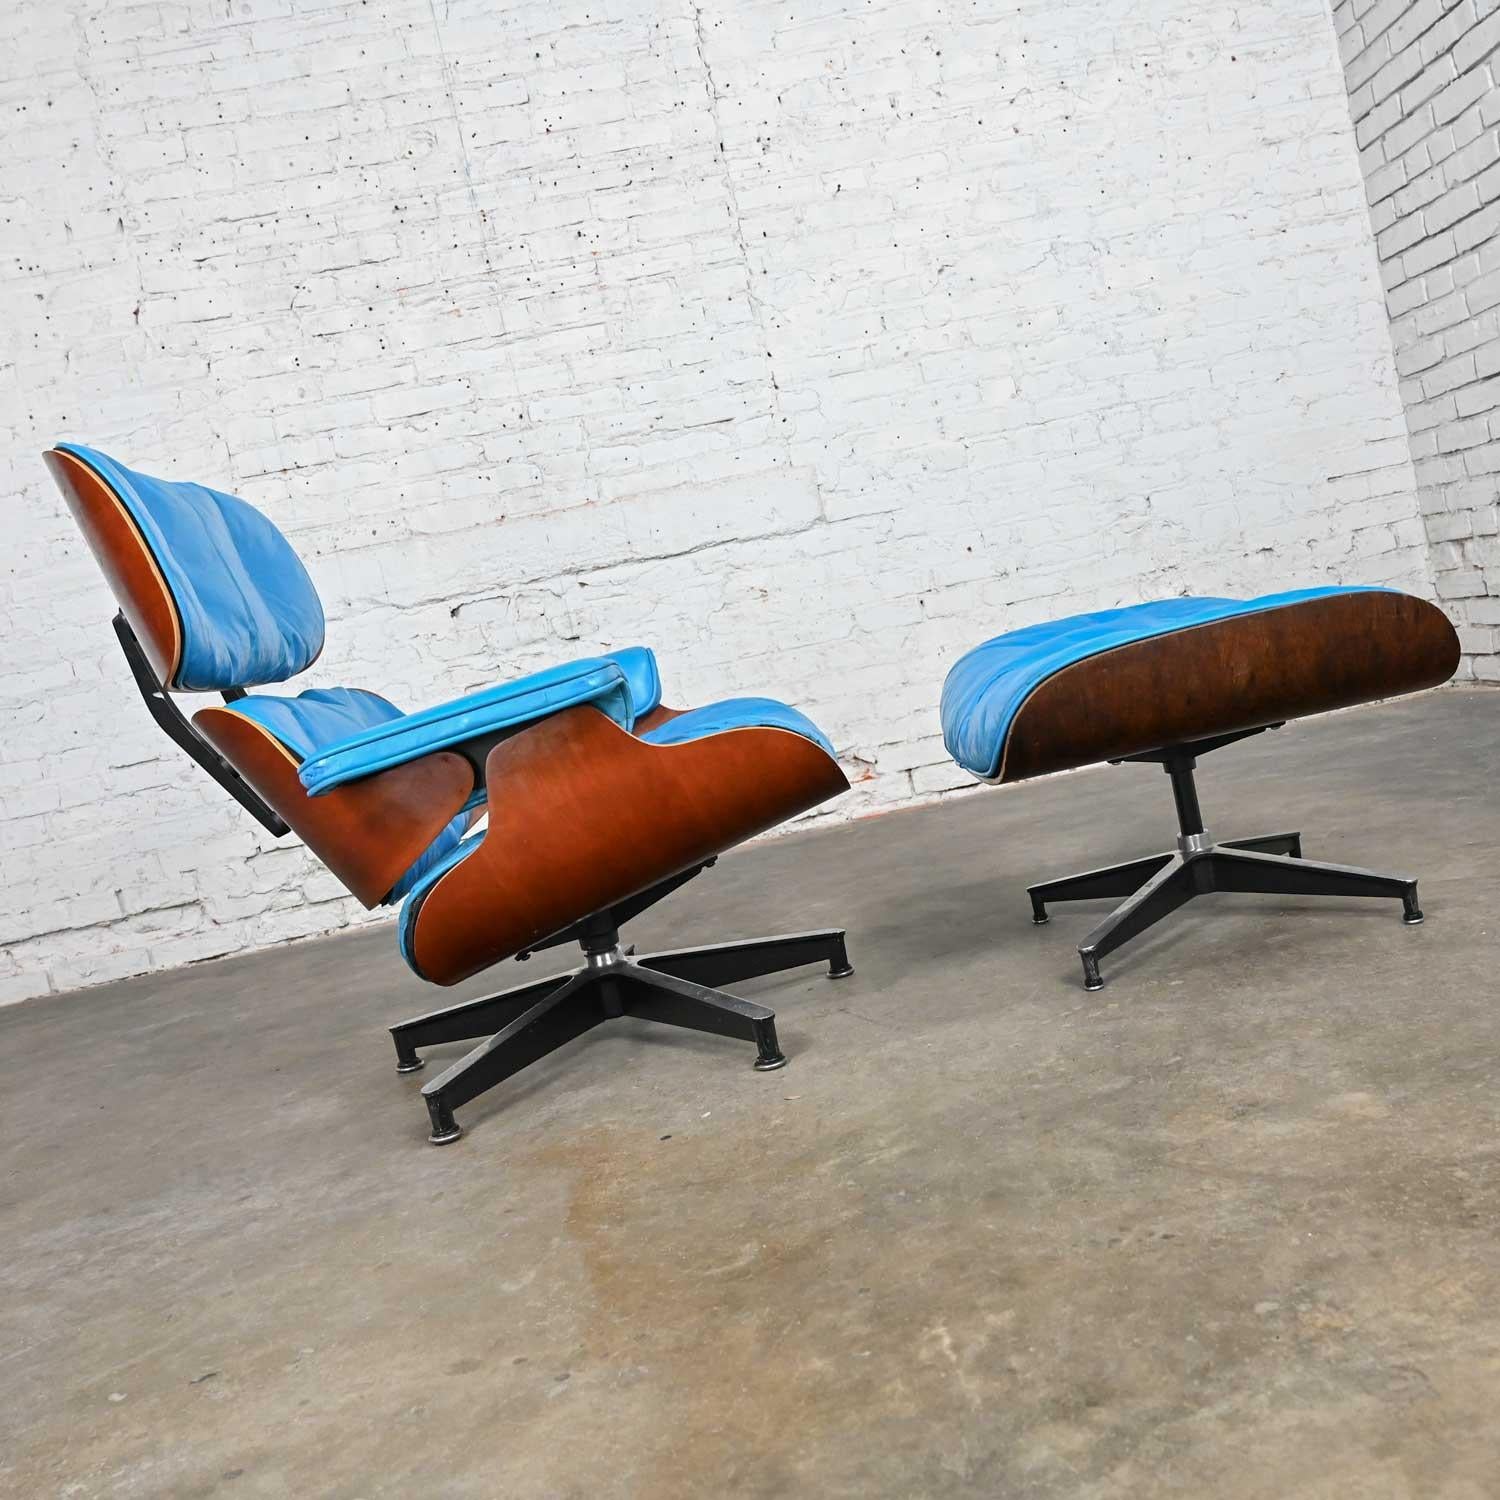 American Eames 670 Lounge Chair 671 Ottoman Blue Leather Walnut Rosewood Herman Miller